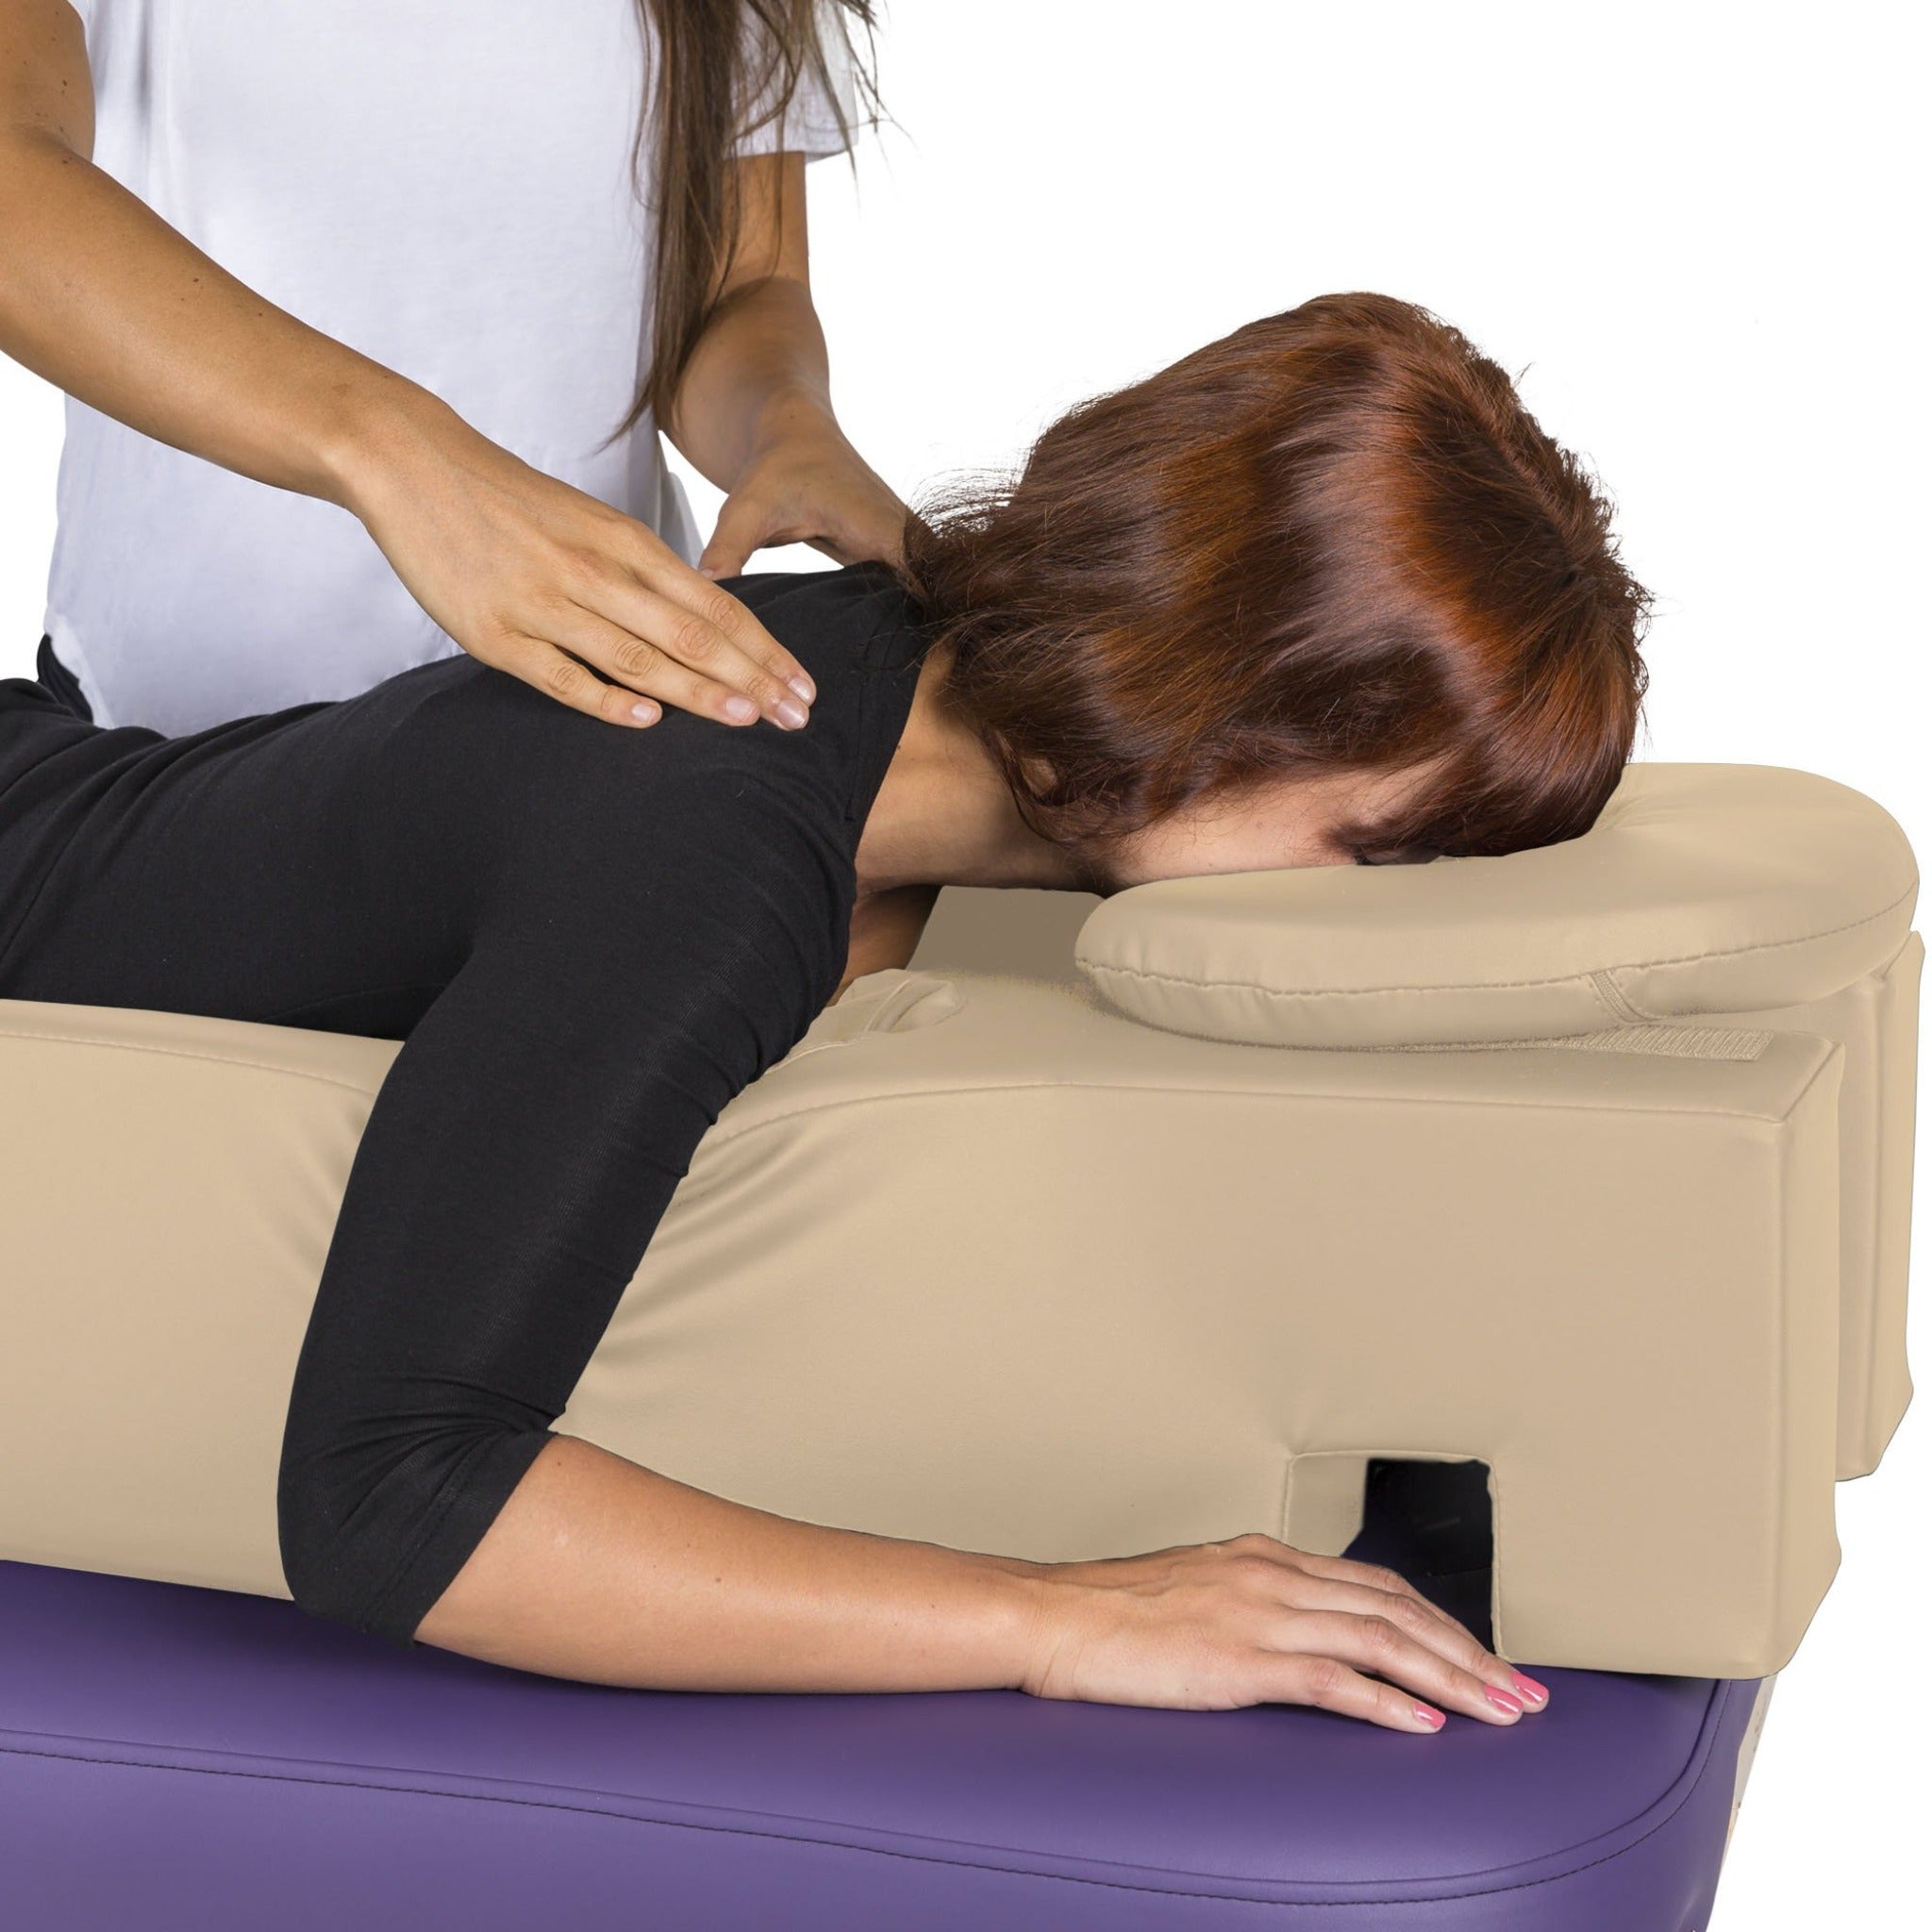 EarthLite Pregnancy Body Positioning System for Prone Comfortsitioni